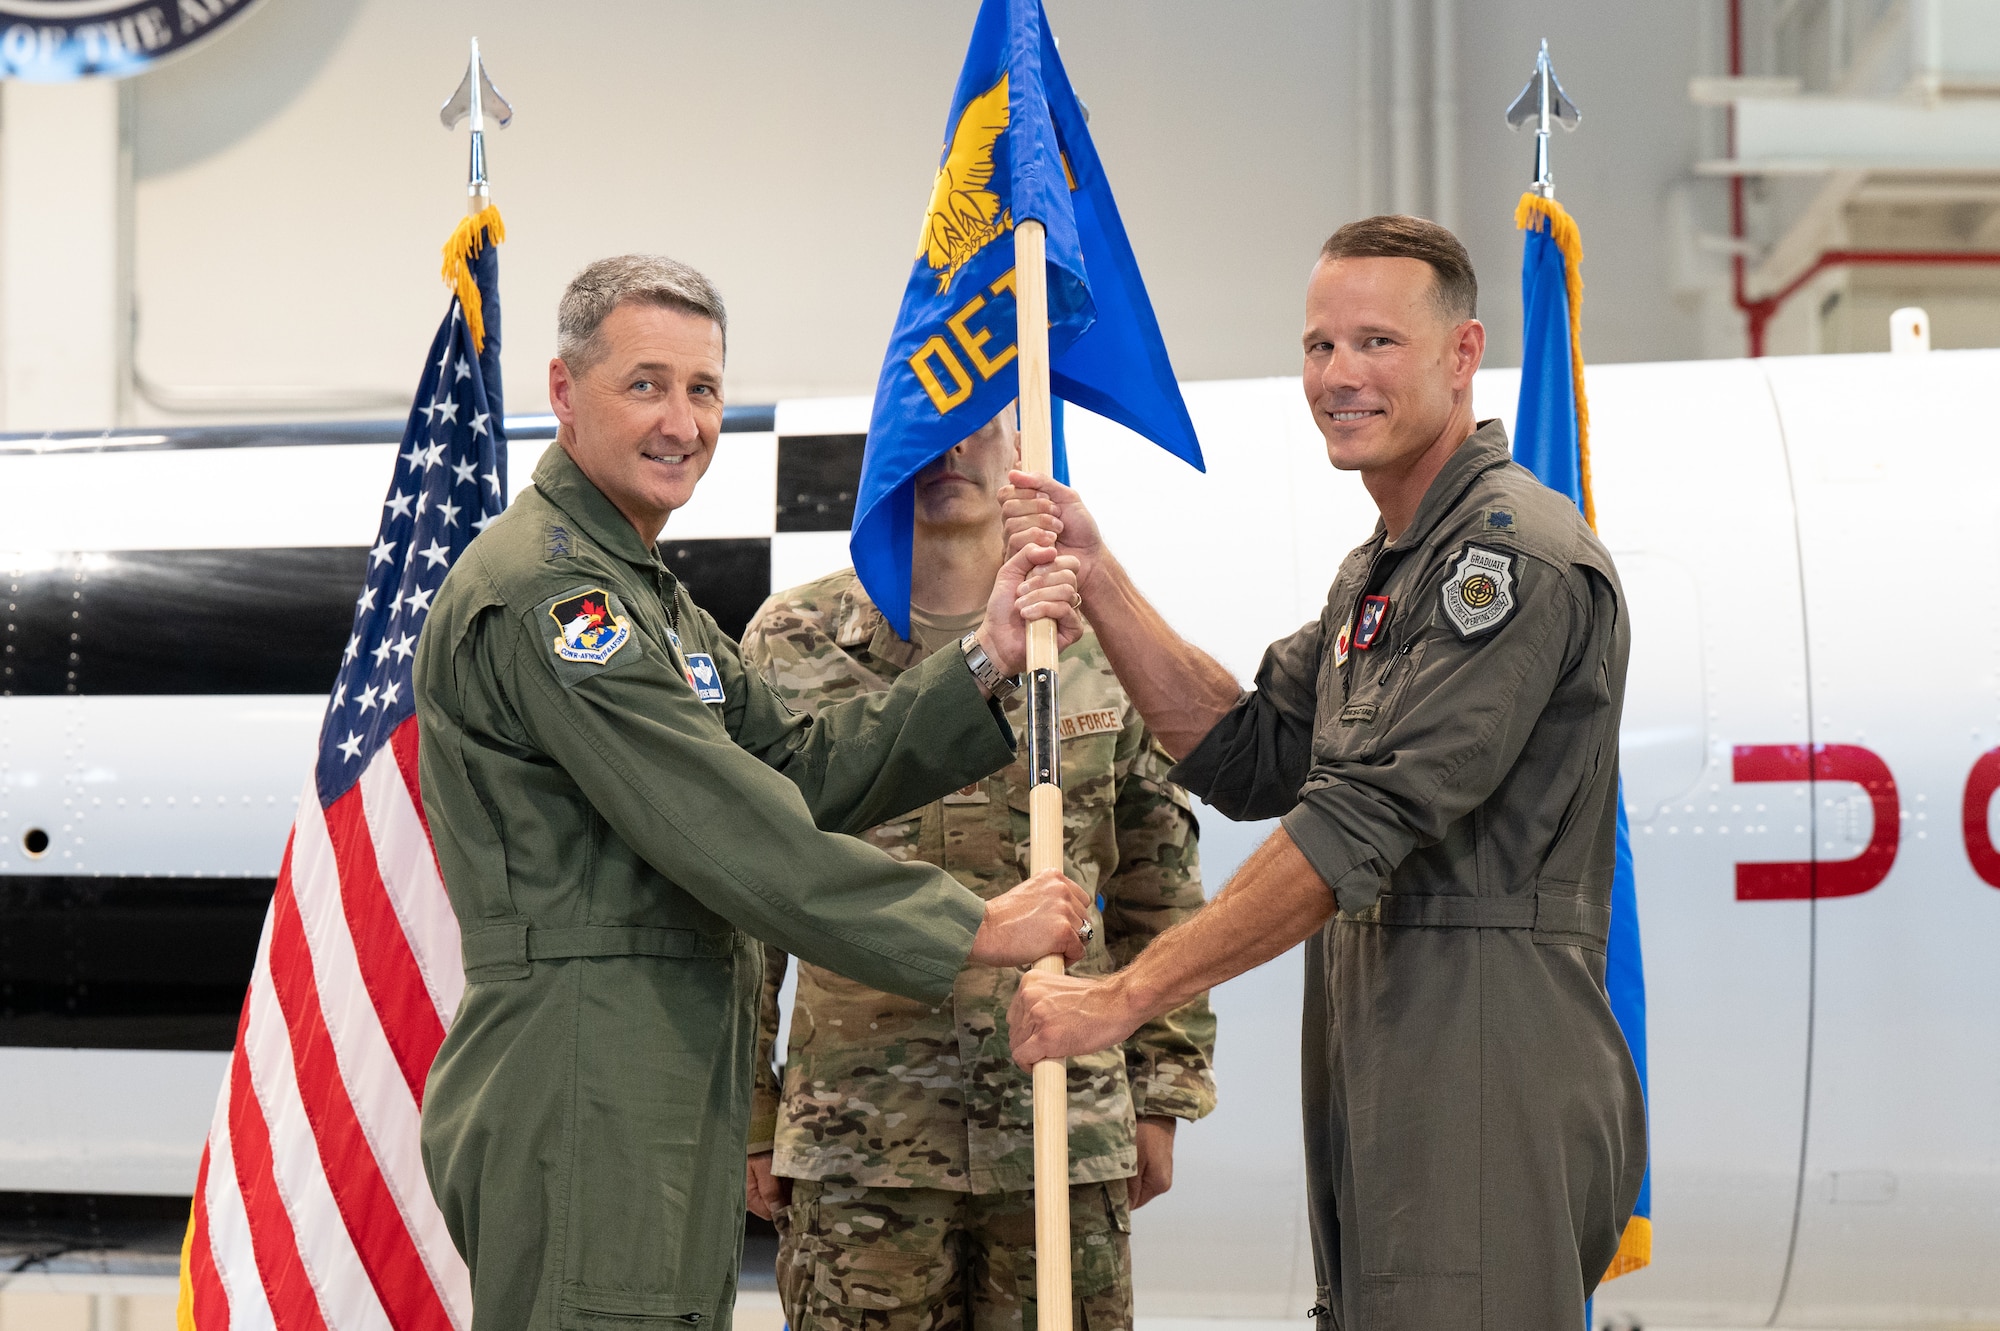 Lt. Col. Nick Pettit, commander, 1st Air Force, Detachment 3, accepts the Det. 3 guidon from Lt. Gen. Steven S. Nordhaus, commander, Continental U.S. NORAD Region - 1st Air Force (Air Forces Northern and Air Forces Space), during a Change of Command ceremony July 20, 2023, Patrick Space Force Base, Fla.